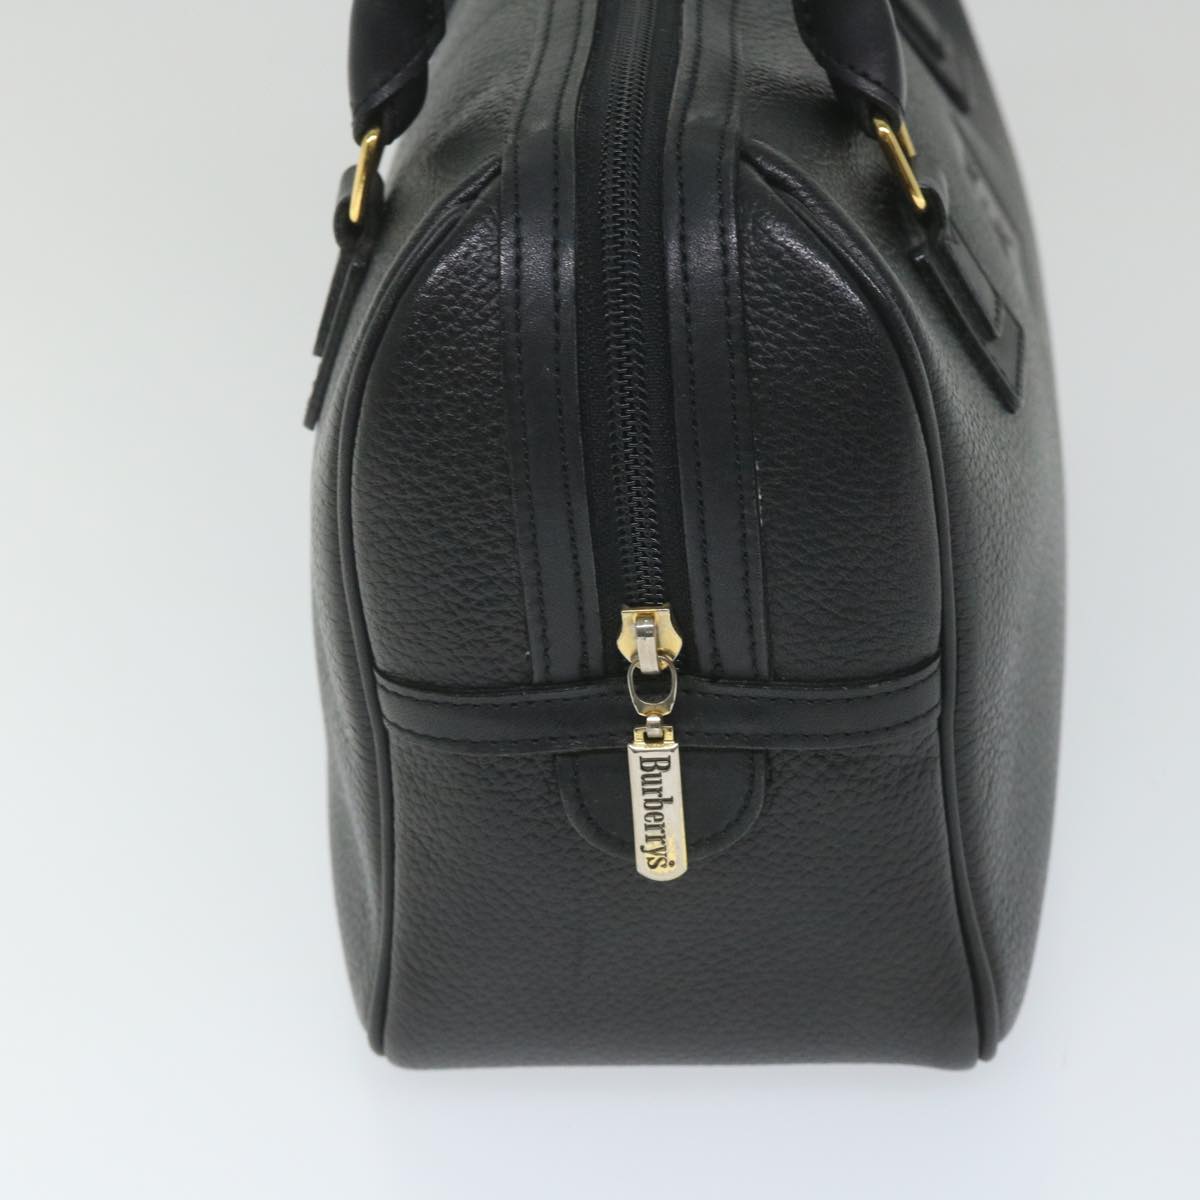 Burberrys Hand Bag Leather Black Auth bs9531